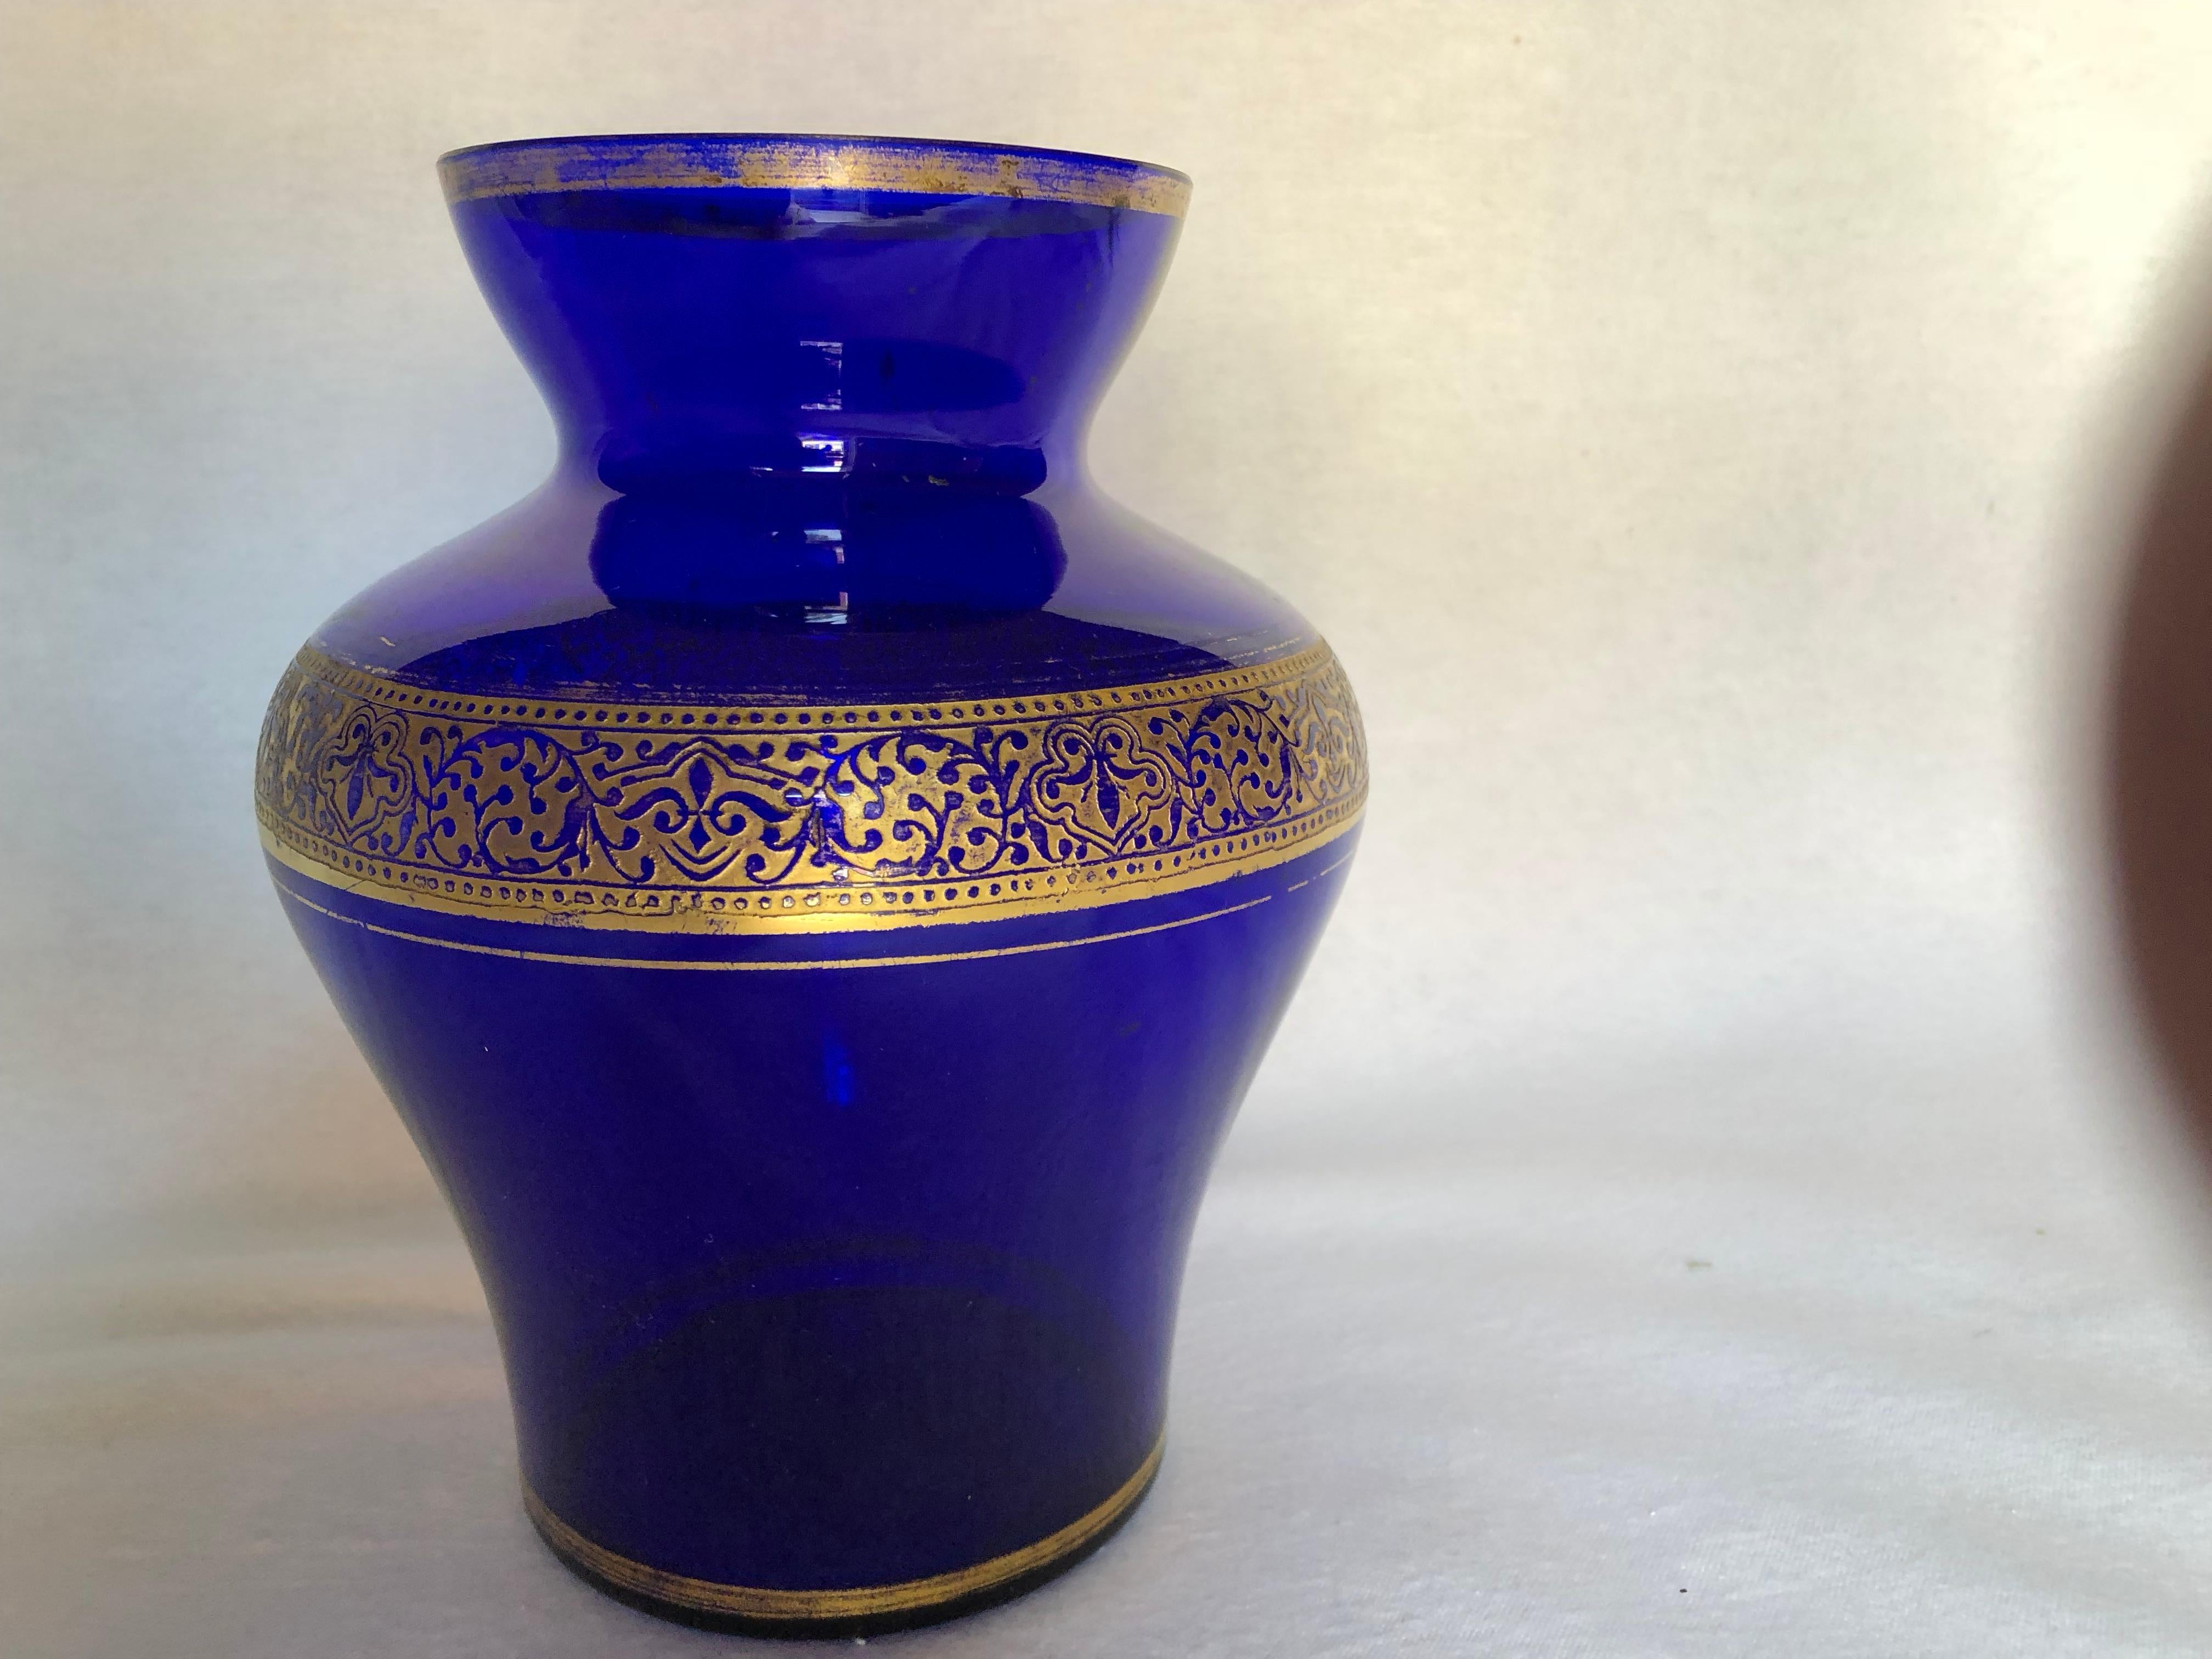 This beautiful vase was made in Germany of cobalt blue glass and is embellished with elaborate gold trim. No cracks or chips. Some gold loss.